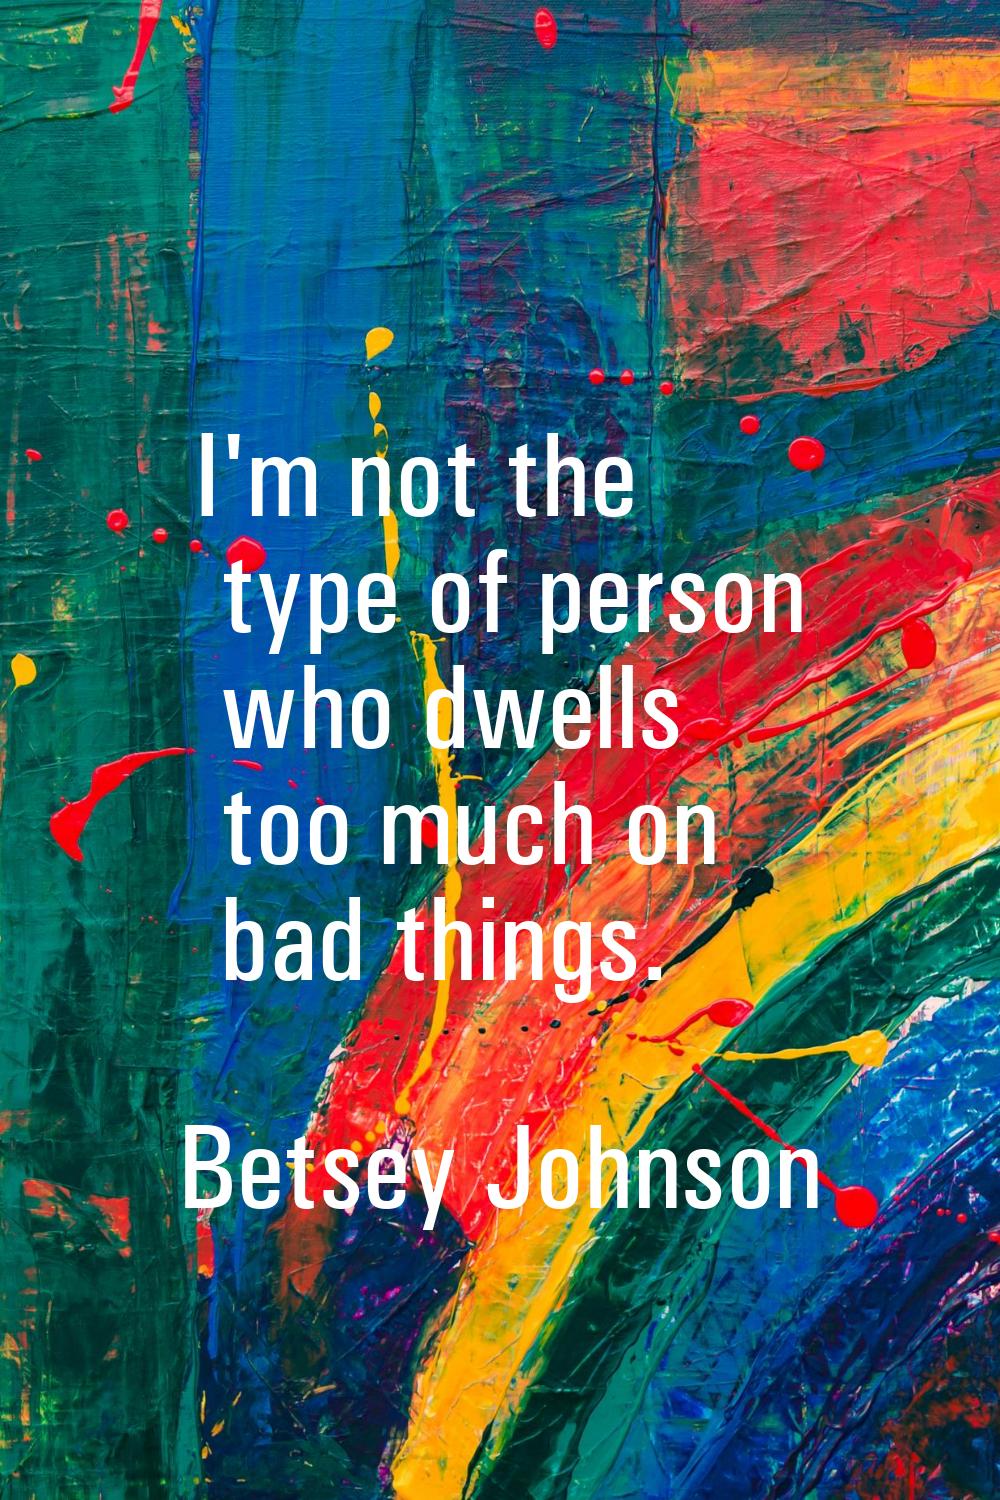 I'm not the type of person who dwells too much on bad things.